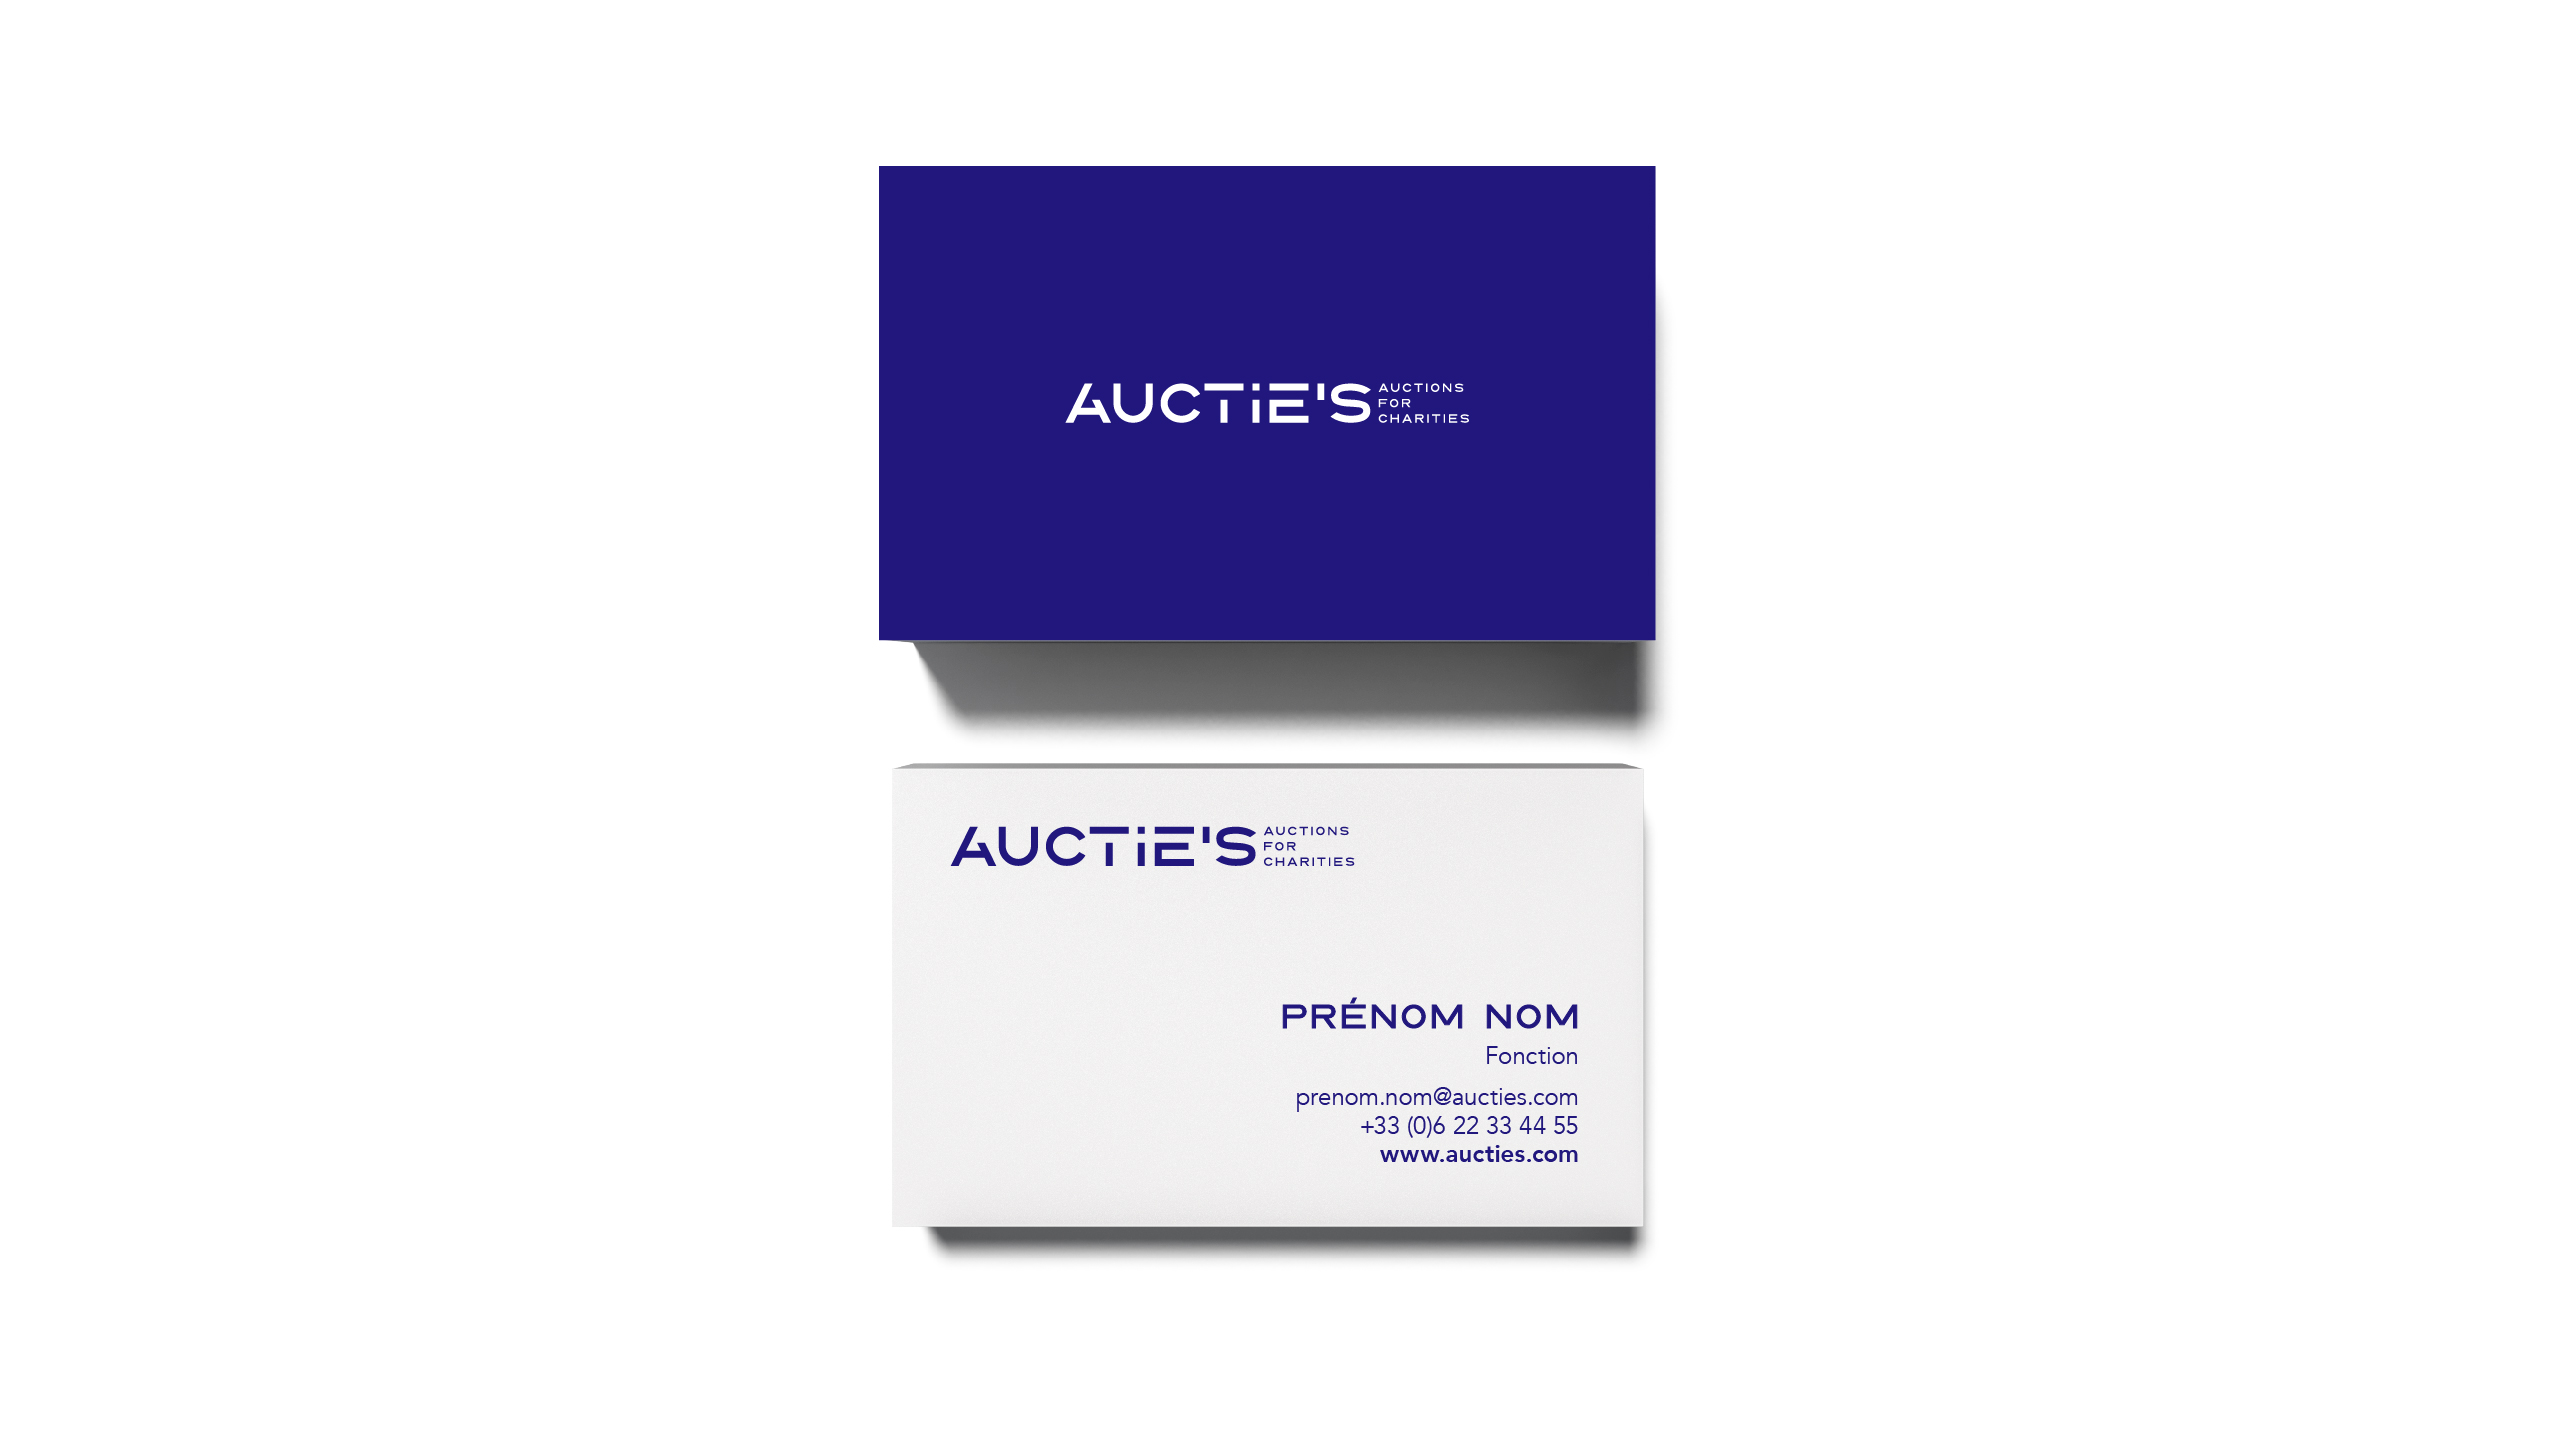 aucties_4_business_card